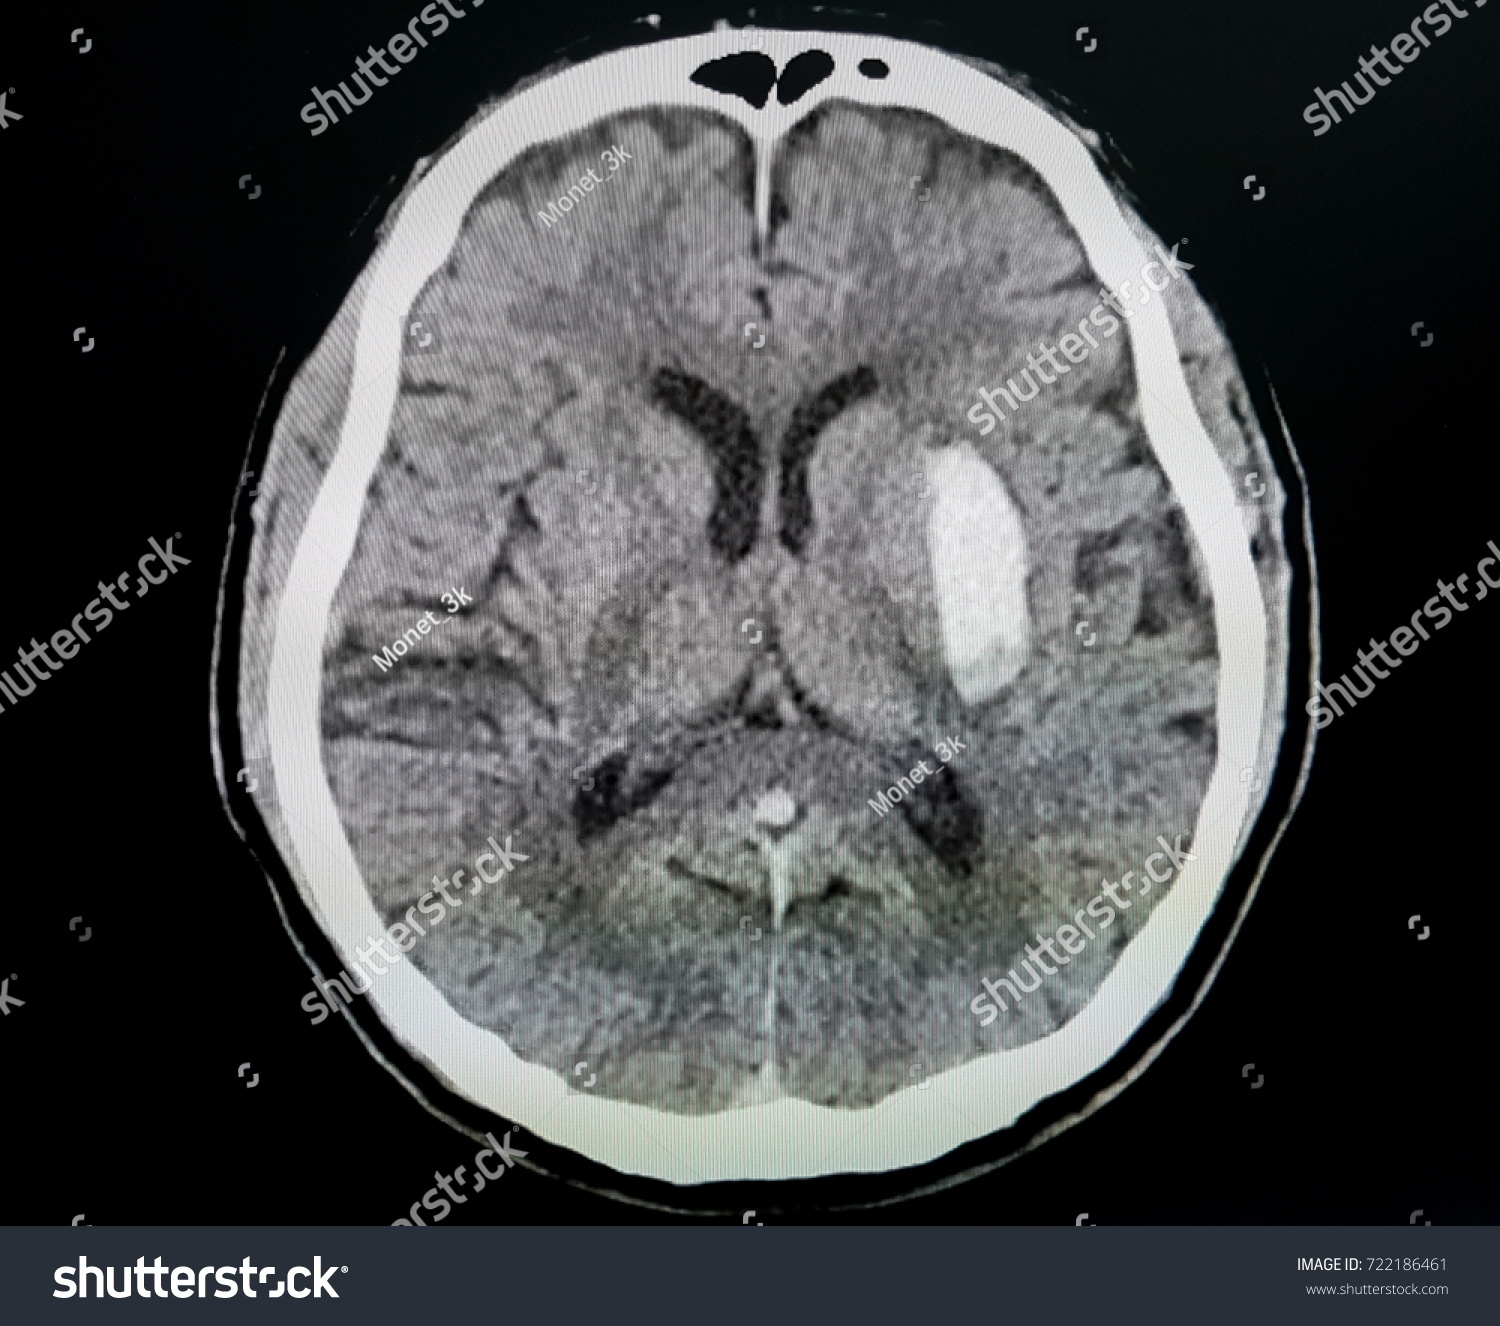 Ct Scan Brain Showing Intracerebral Haemorrhage Stock Photo Shutterstock